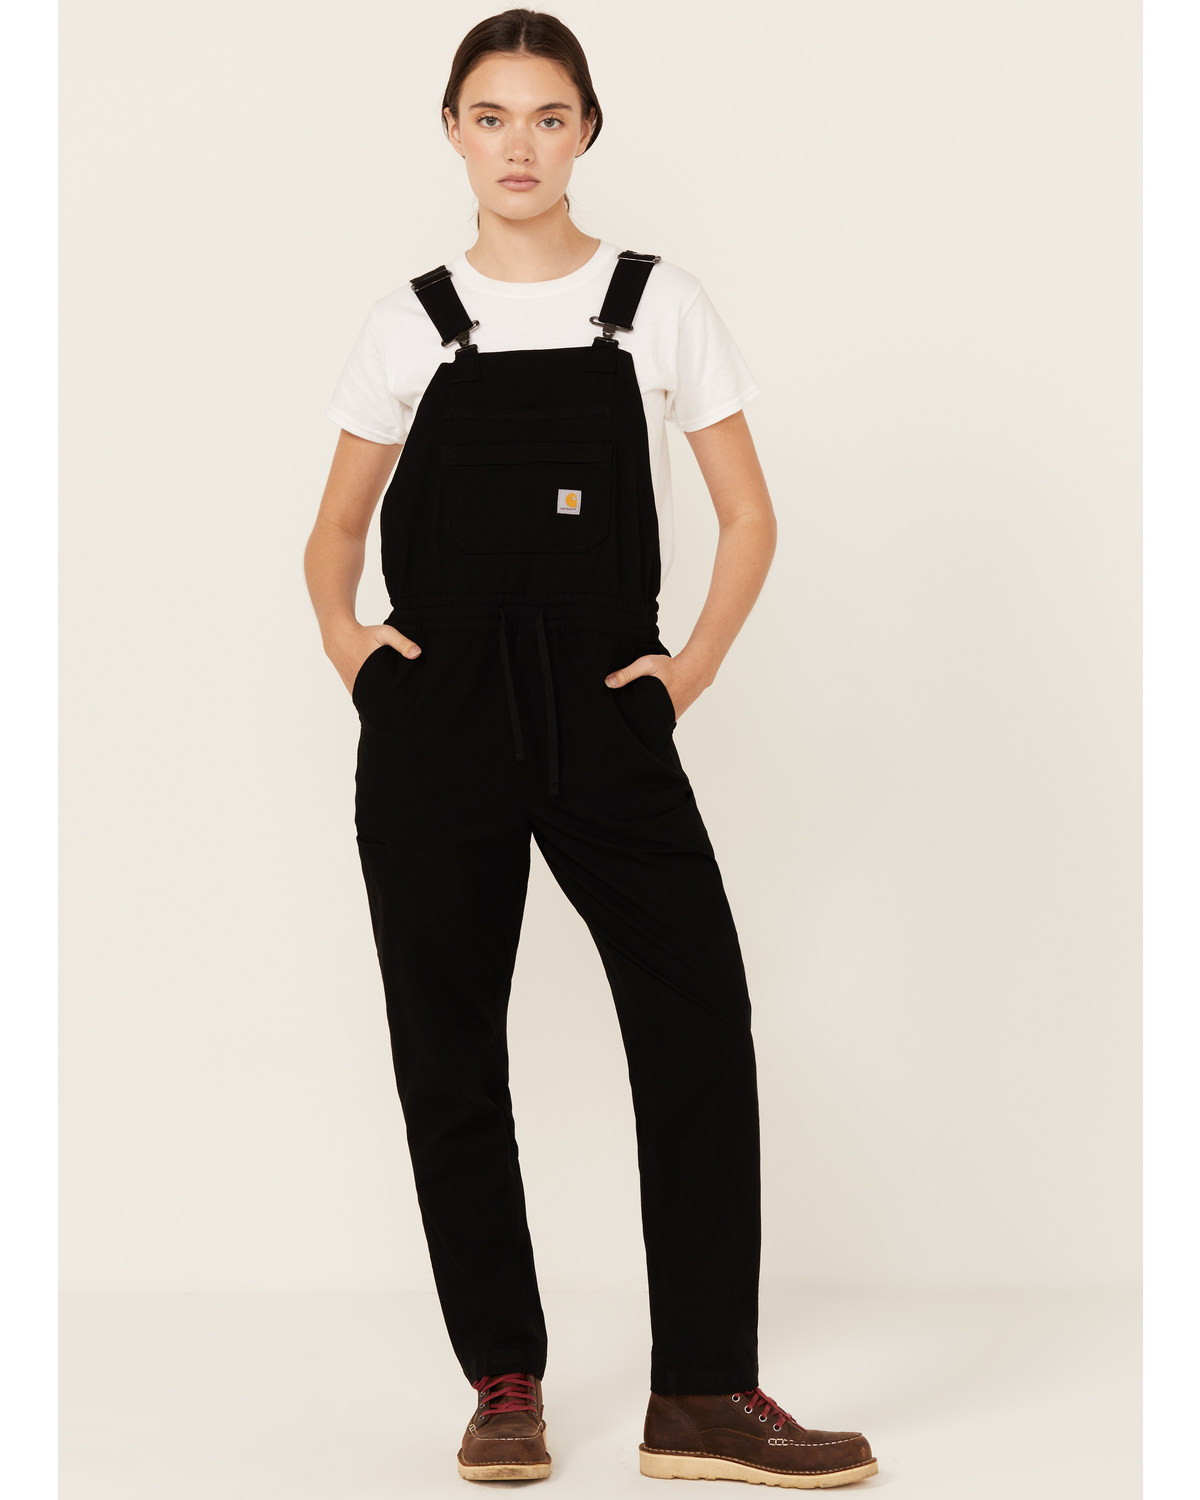 Carhartt Women's Force® Relaxed Fit Ripstop Bib Overalls